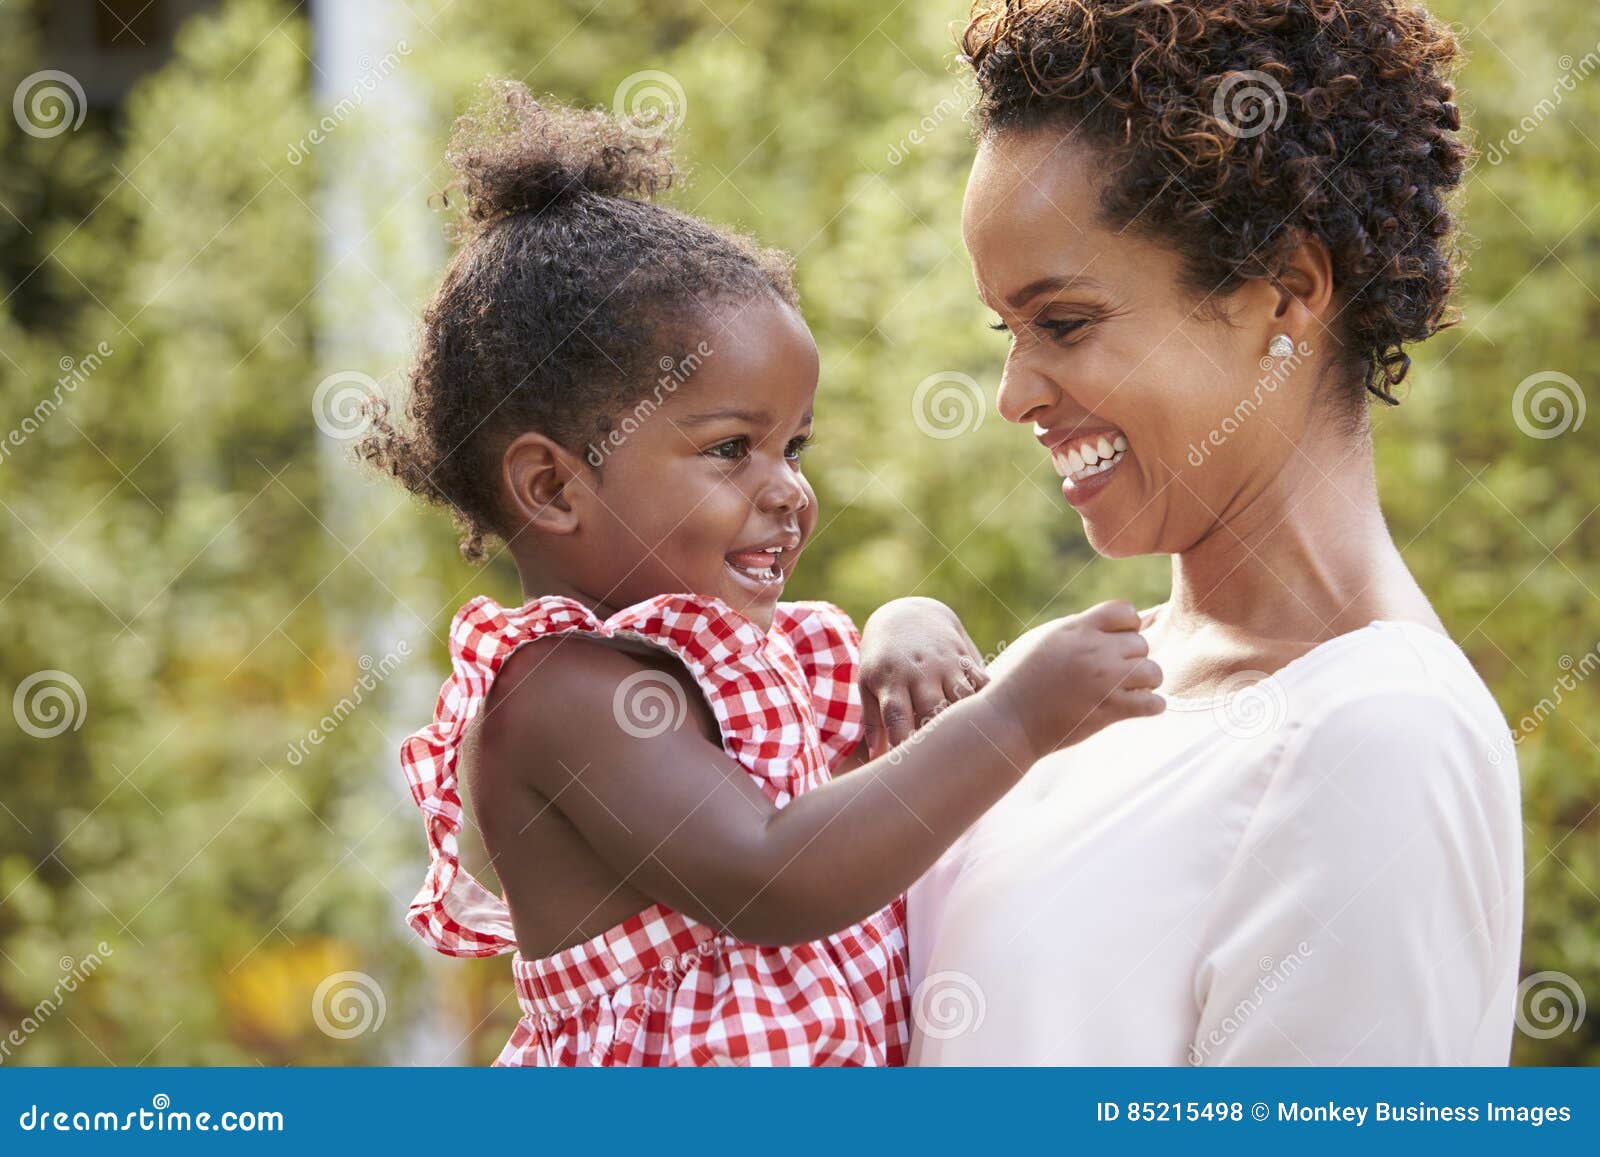 young african american mother holds baby daughter in garden